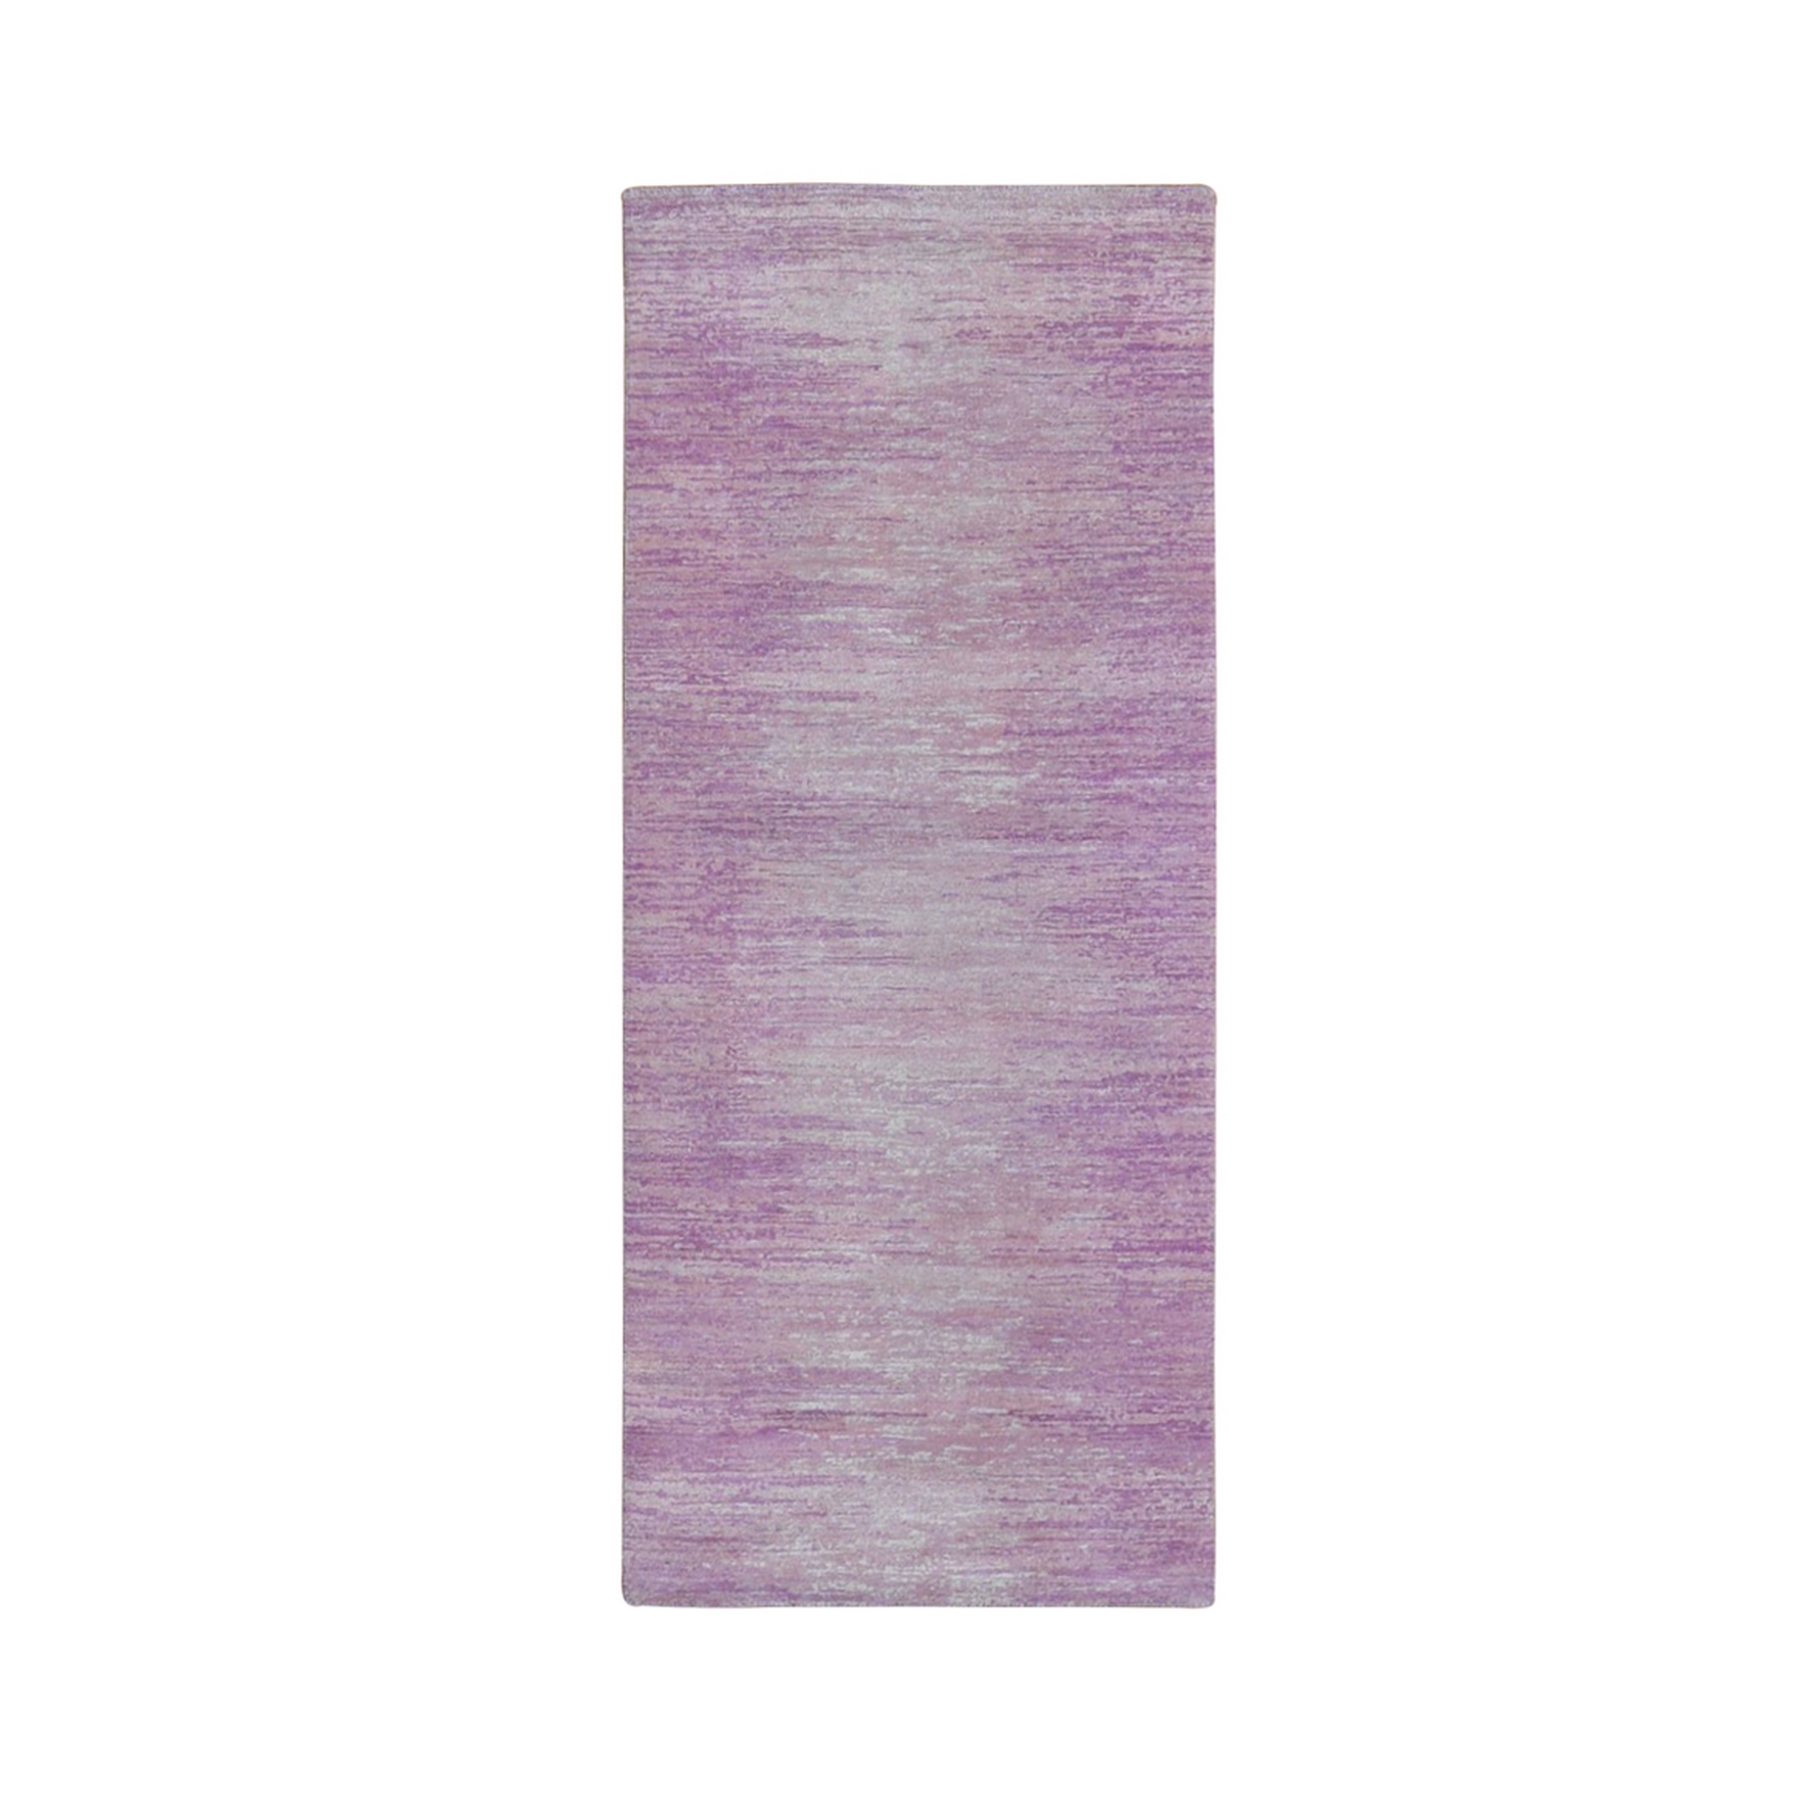 Mid Century Modern Collection Hand Knotted Pink Rug No: 1133506